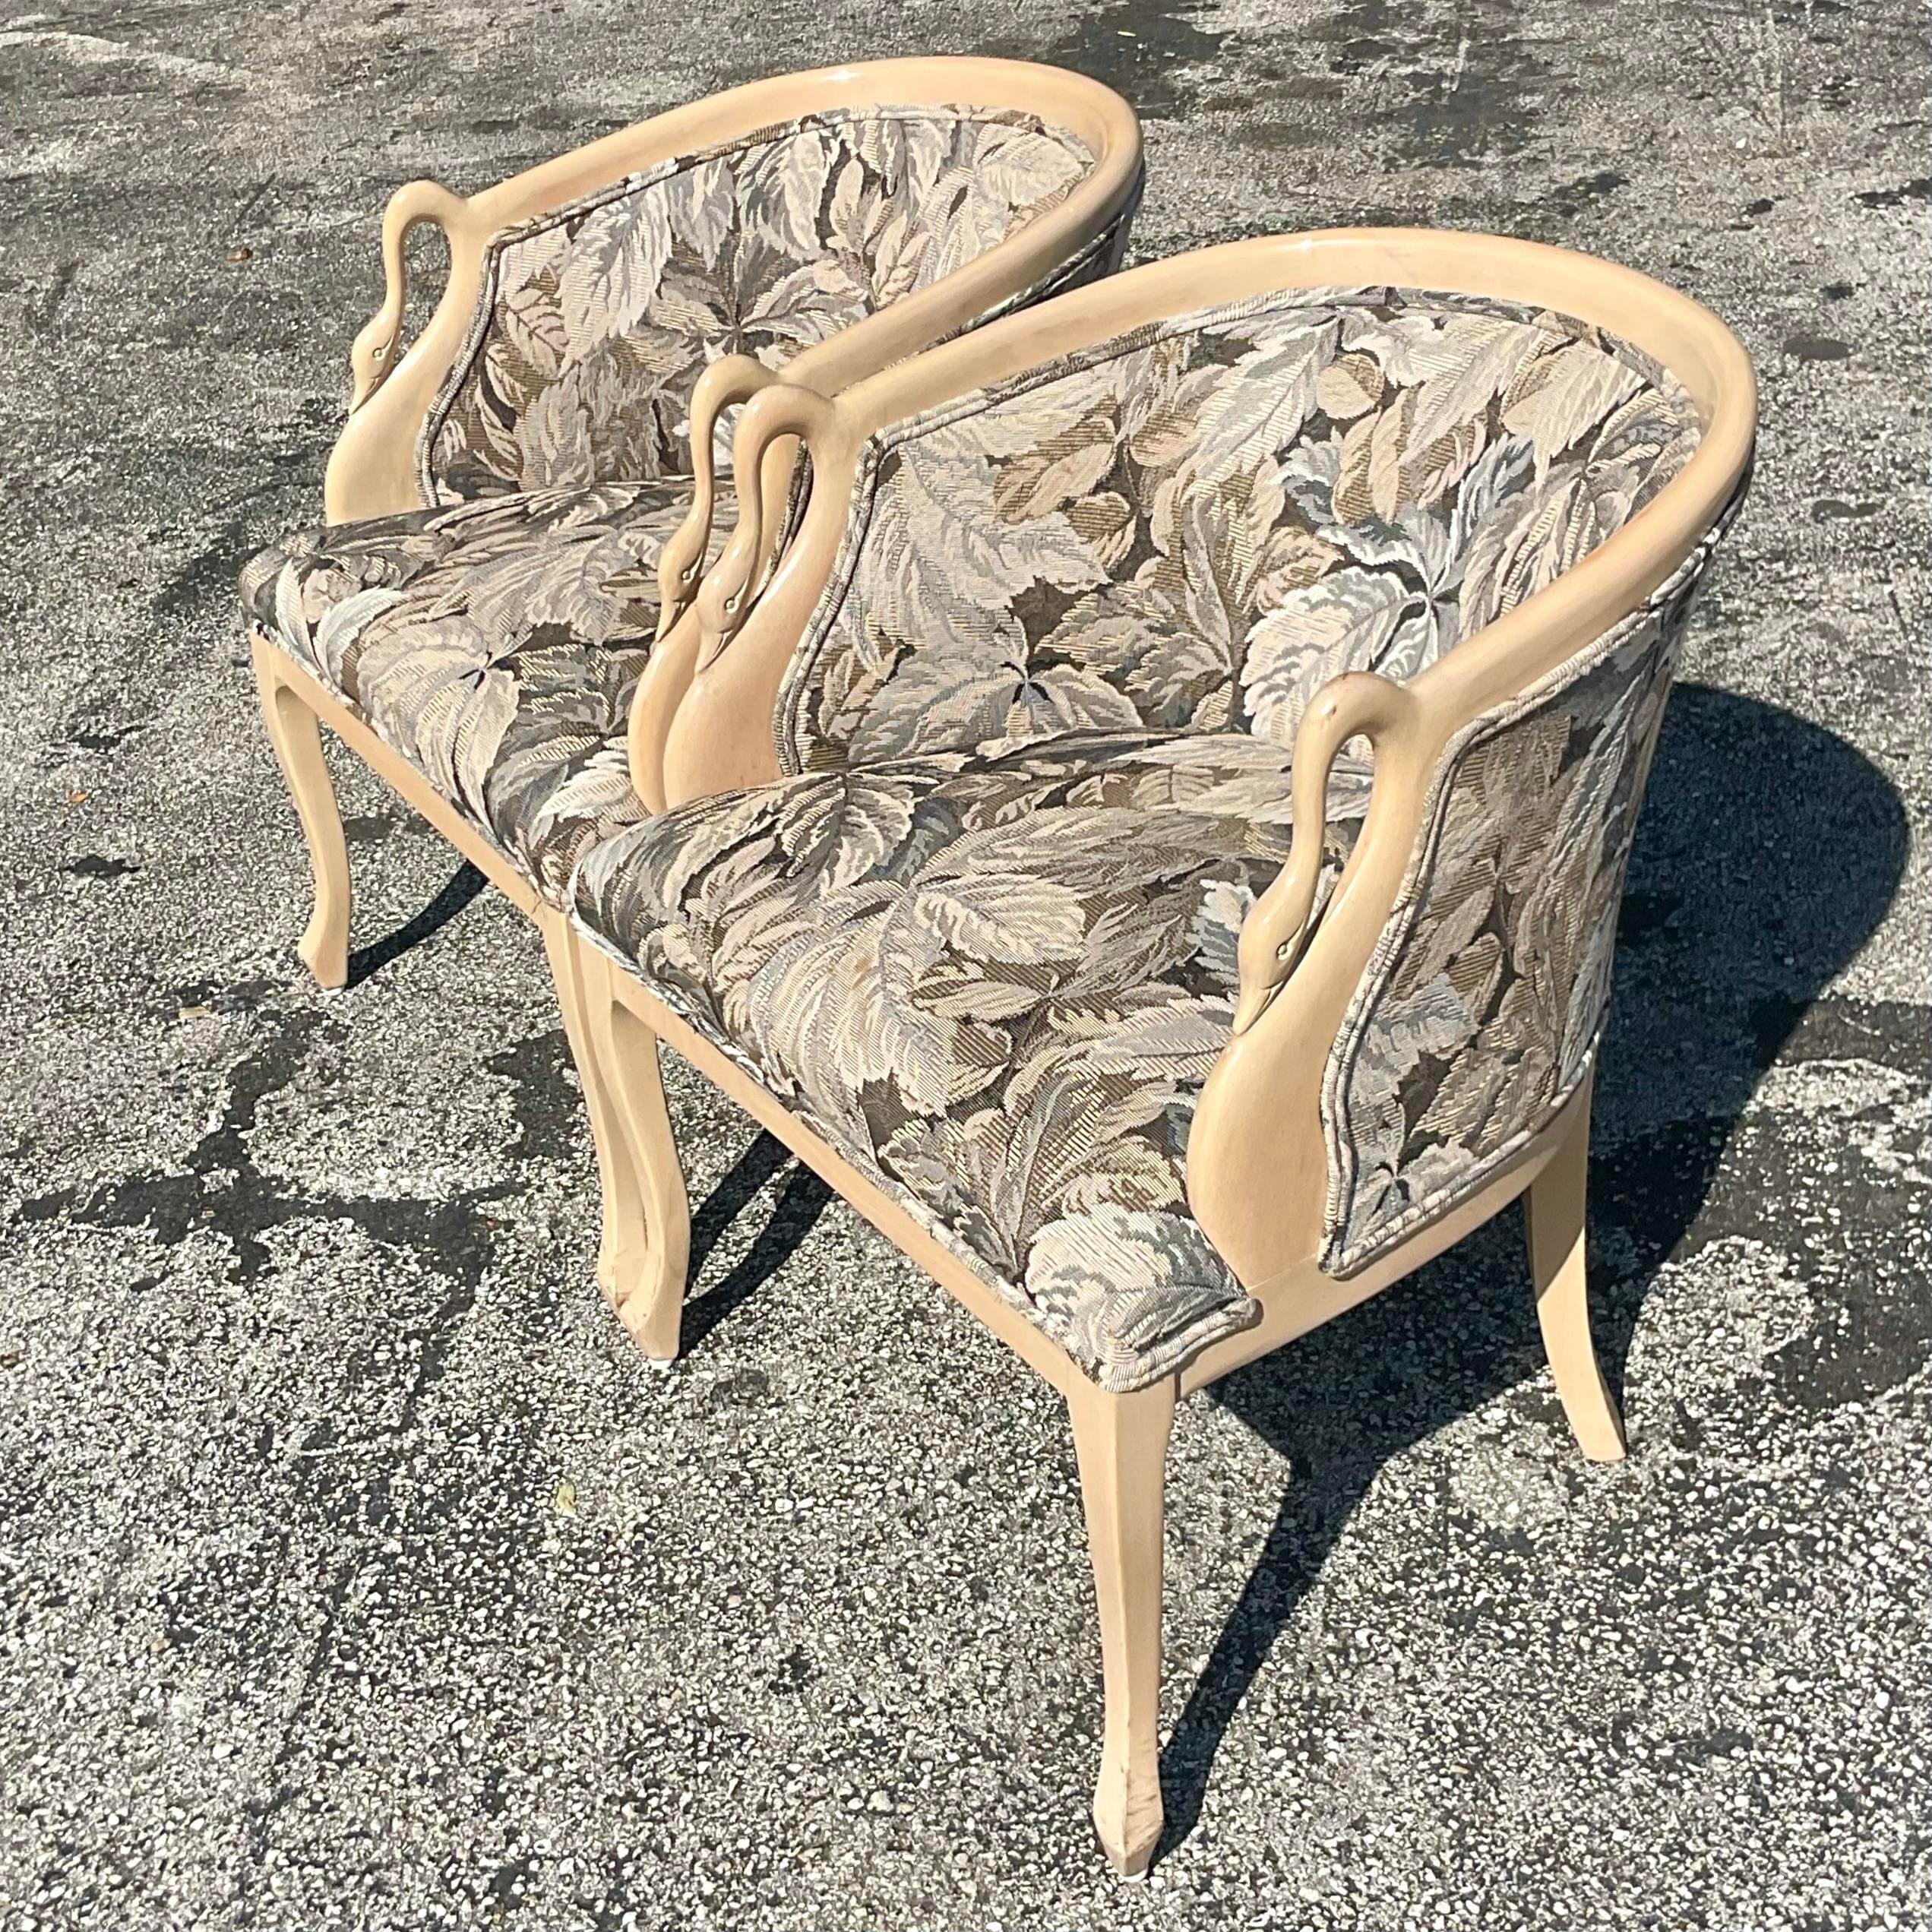 Vintage Regency Carved Swan Head Lounge Chairs - a Pair In Good Condition For Sale In west palm beach, FL